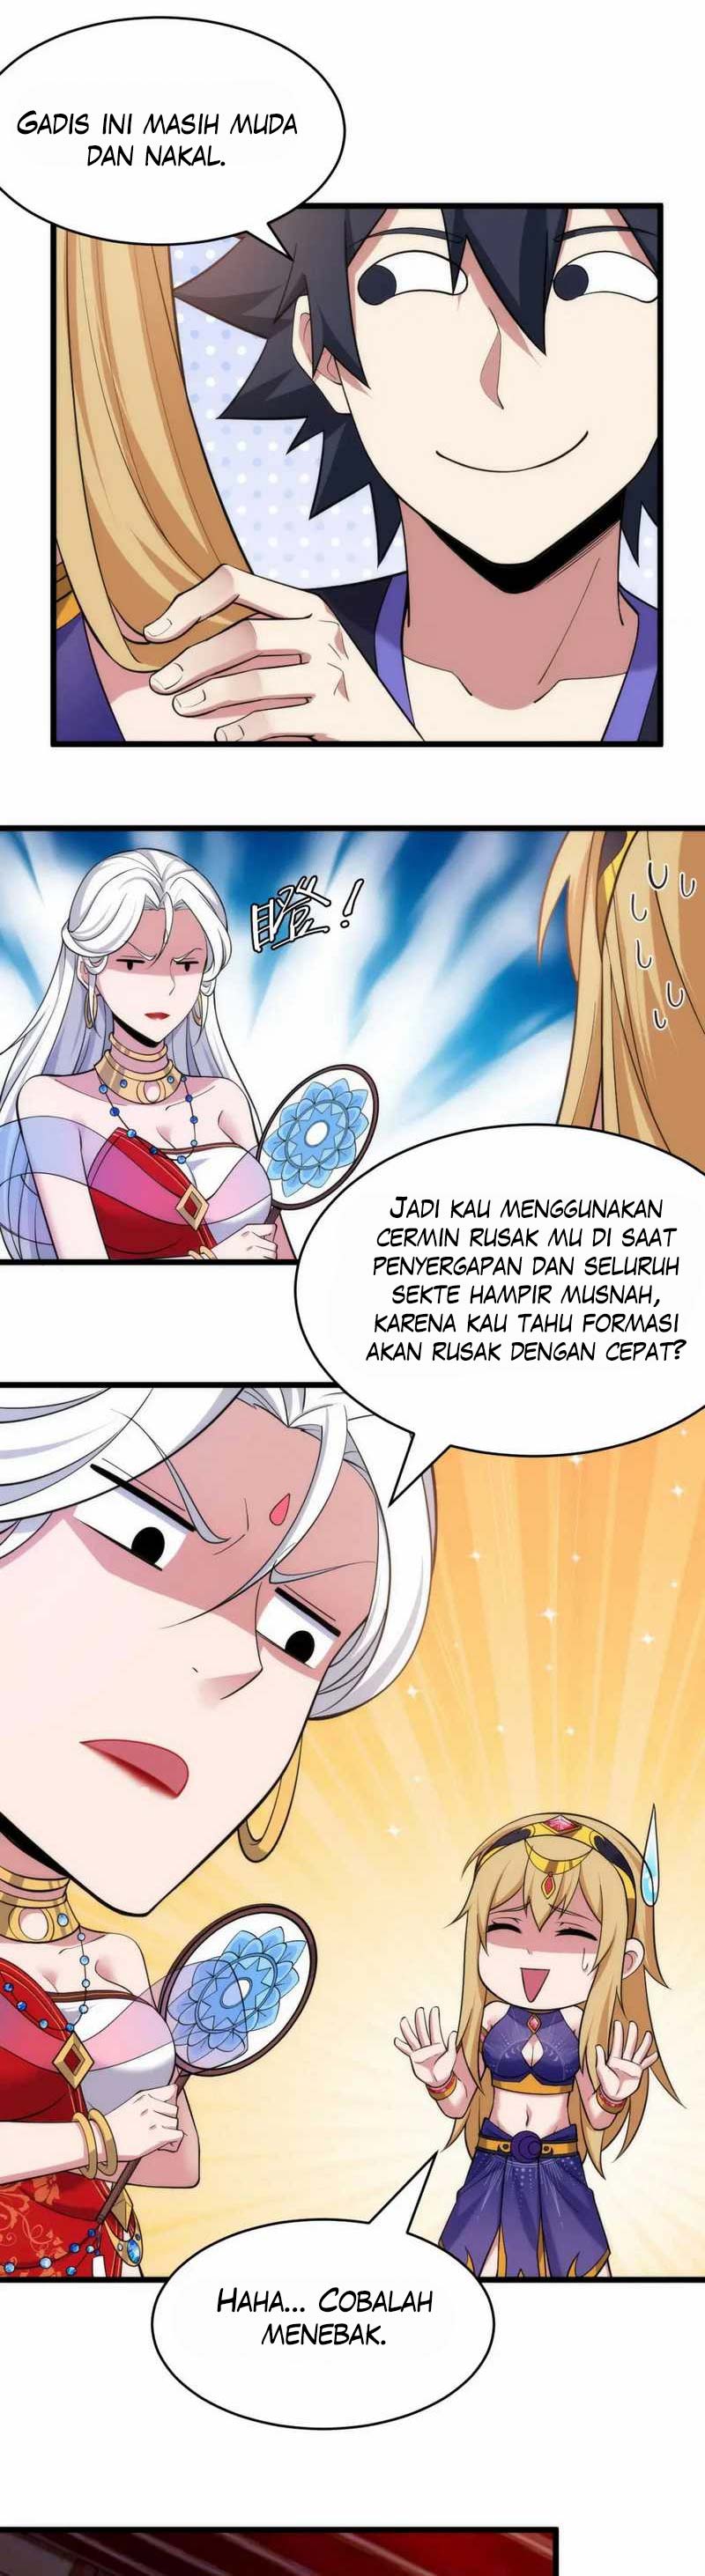 Dilarang COPAS - situs resmi www.mangacanblog.com - Komik i just want to be beaten to death by everyone 138 - chapter 138 139 Indonesia i just want to be beaten to death by everyone 138 - chapter 138 Terbaru 28|Baca Manga Komik Indonesia|Mangacan